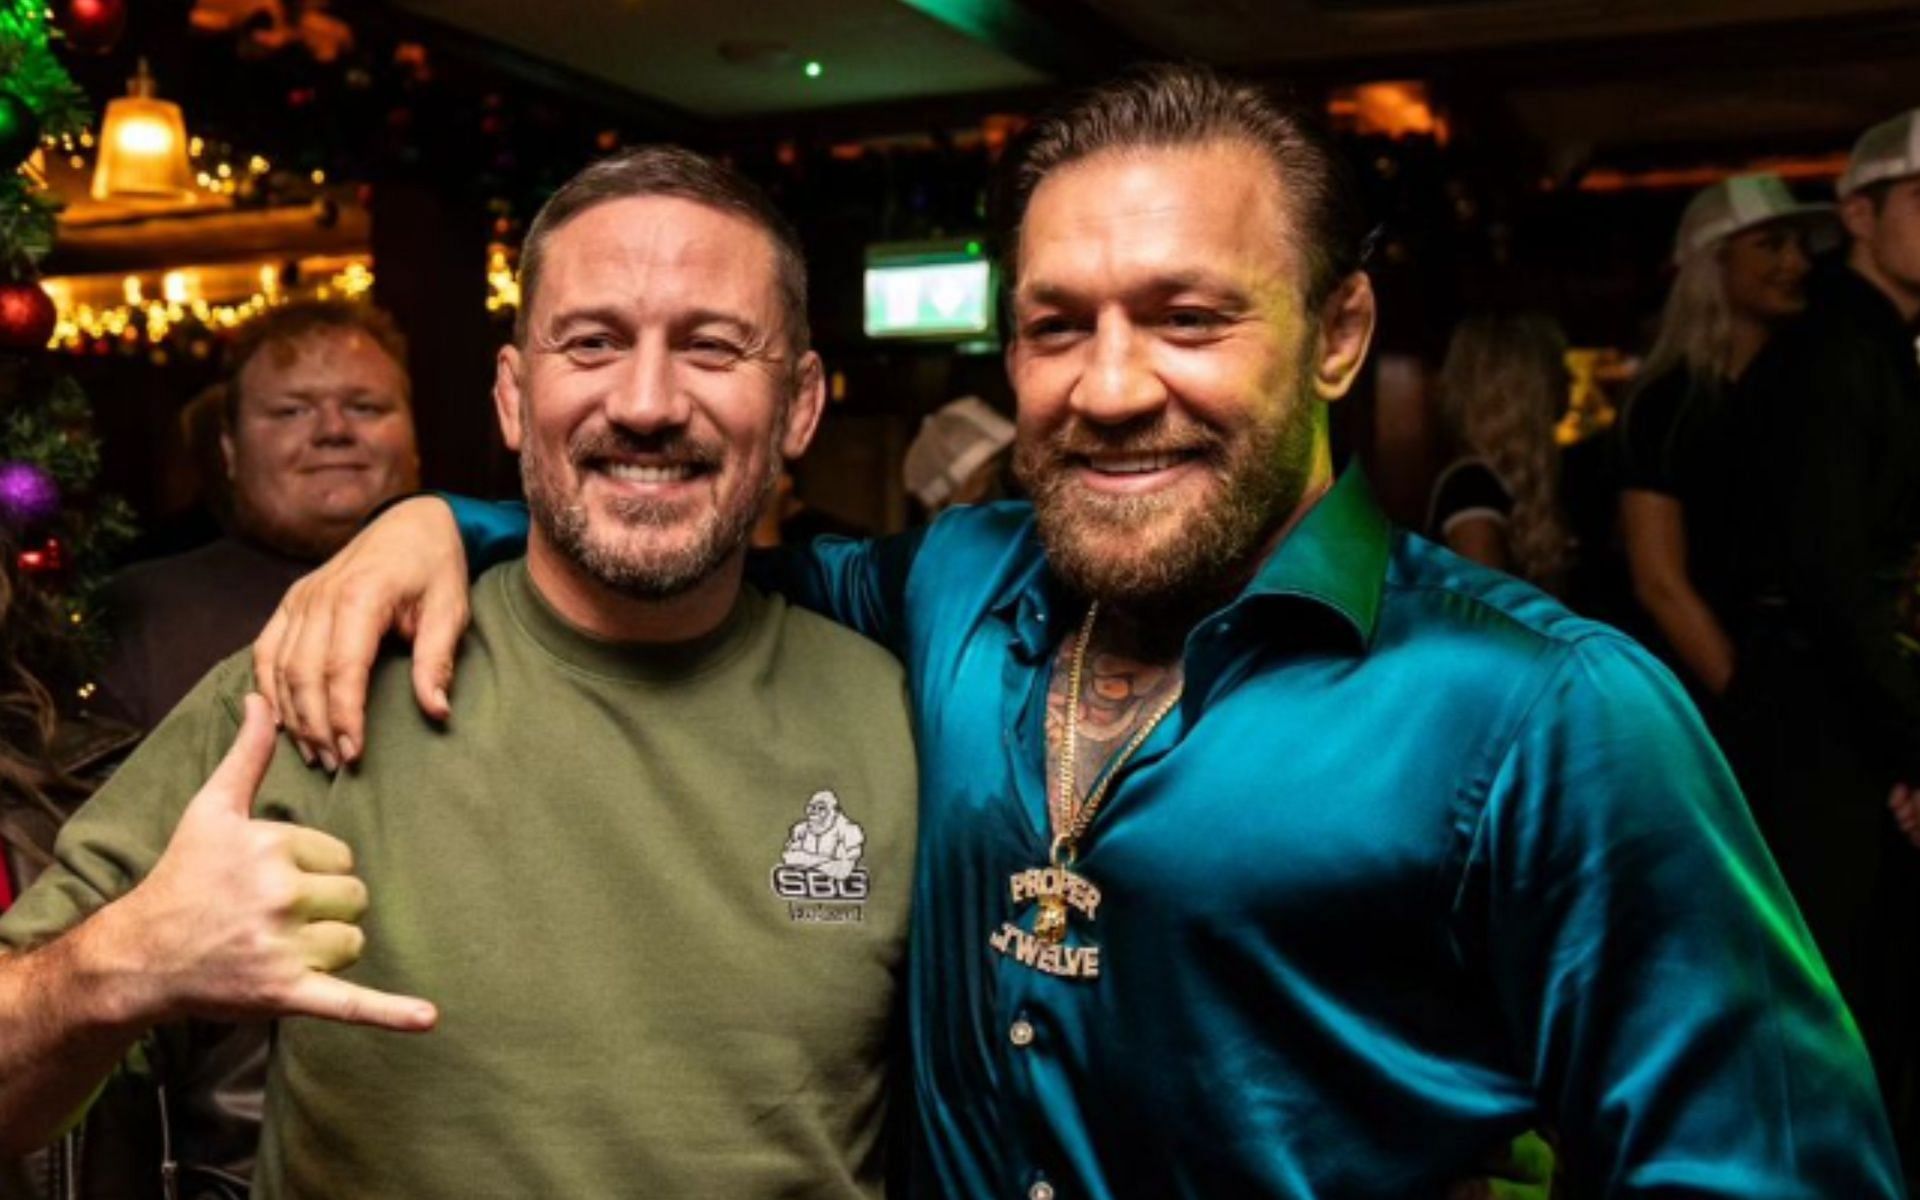 John Kavanagh is just as excited as fans for Conor McGregor